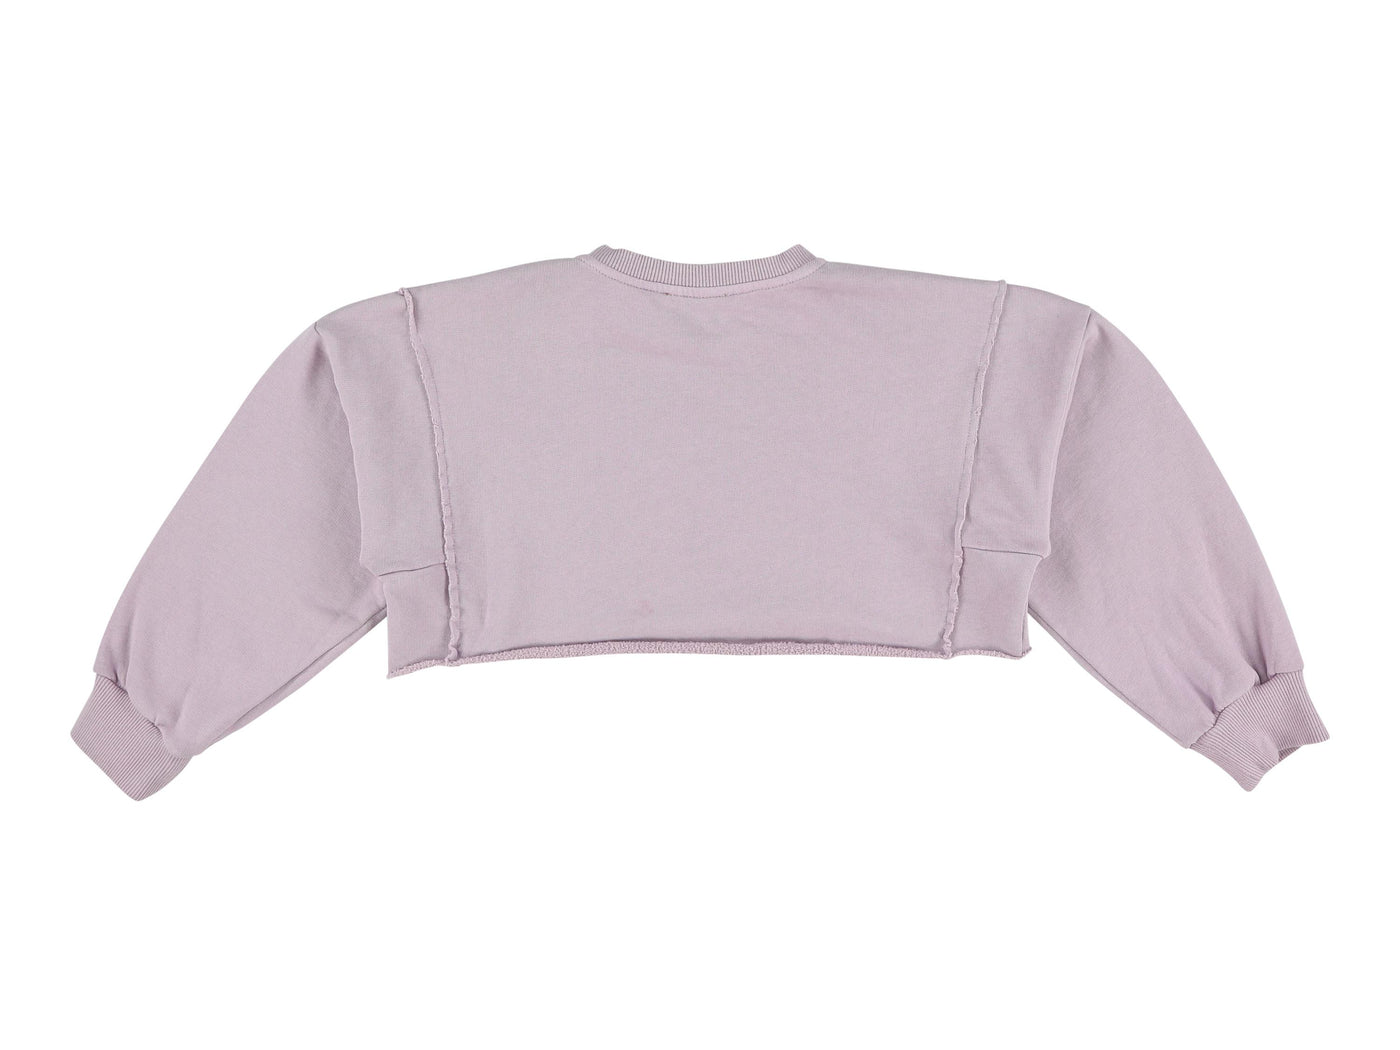 Surf Cropped Sweater in Lavender